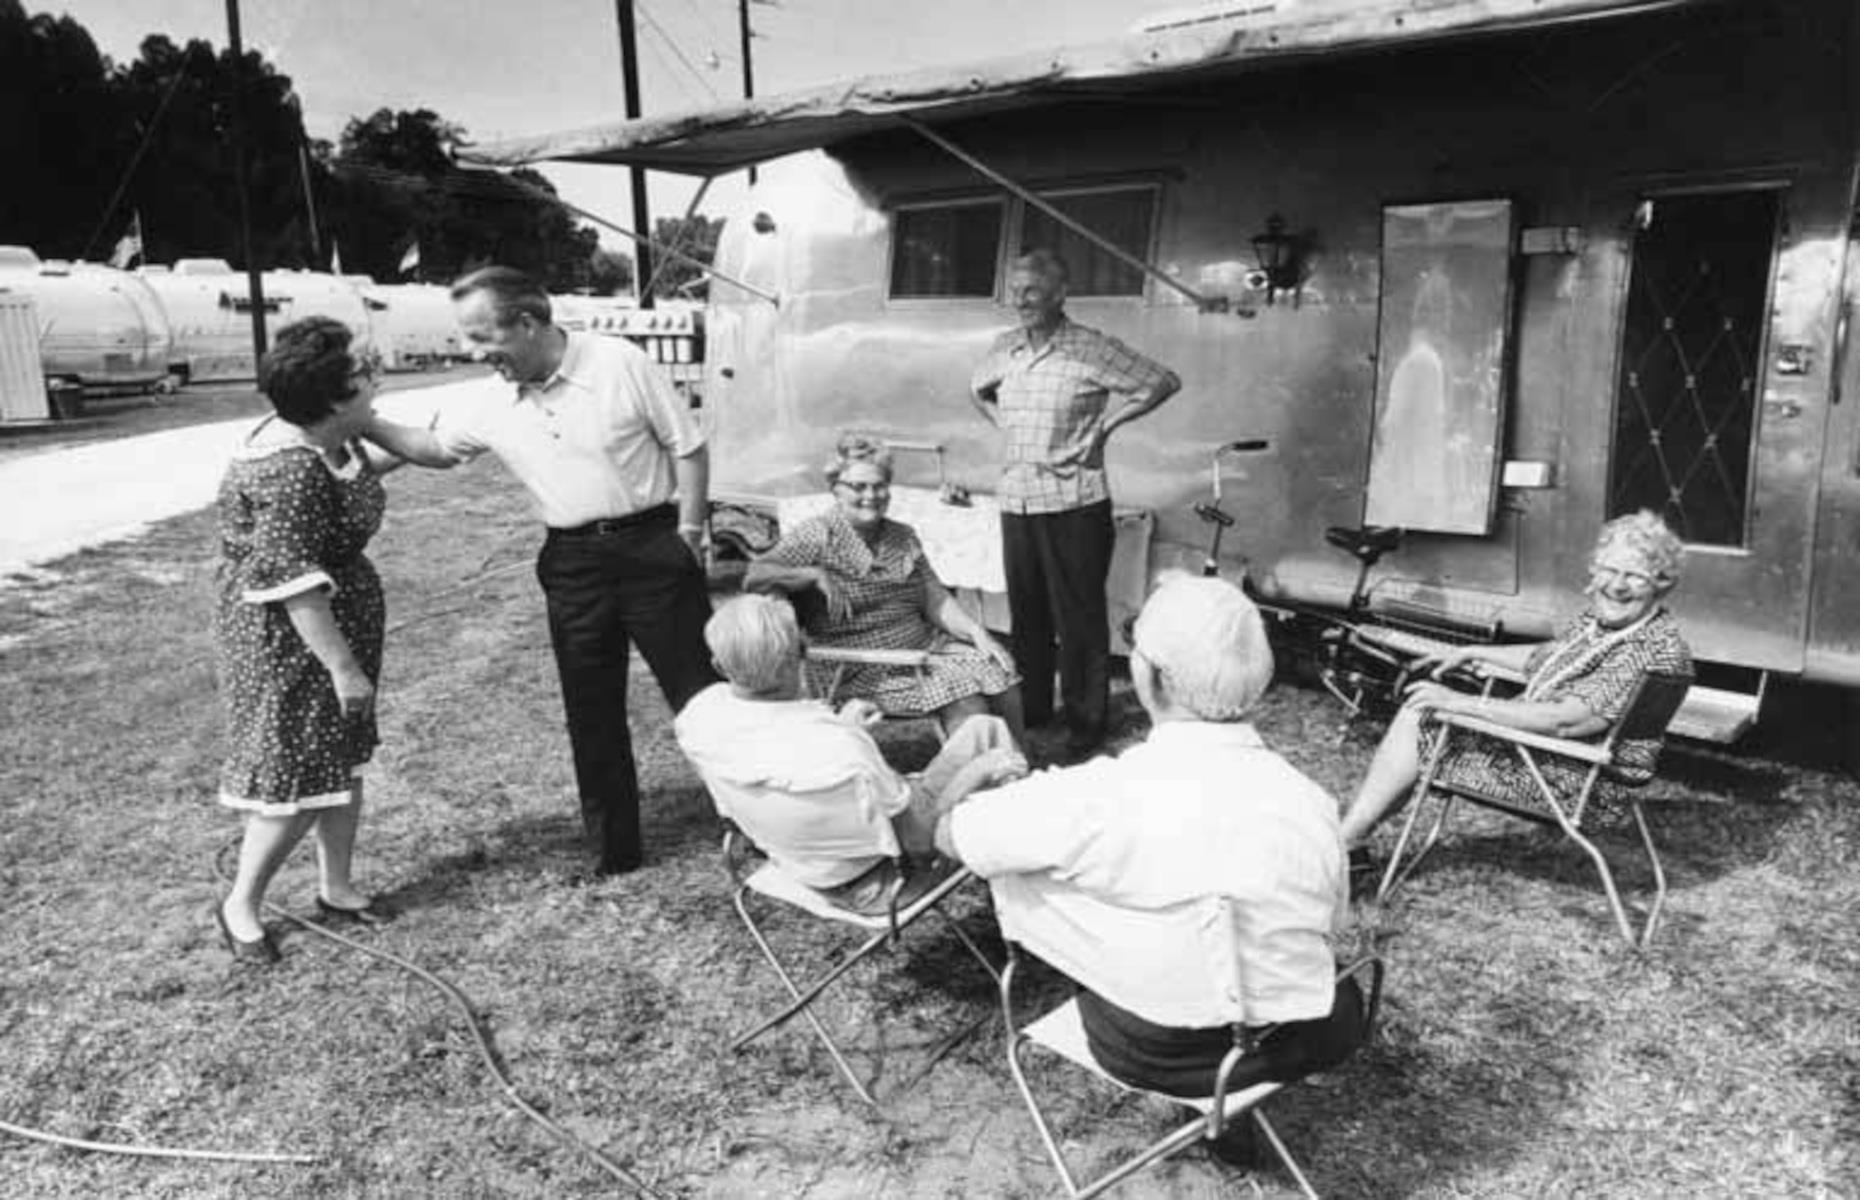 <p>The firm outgrew its Californian HQ by the 50s, and in 1952 Byam opened a larger factory in Ohio. With sales buoyant throughout the decade, Byam further refined his RV lineup and launched the Airstream International, "the world's first self-contained trailer", in 1958.</p>